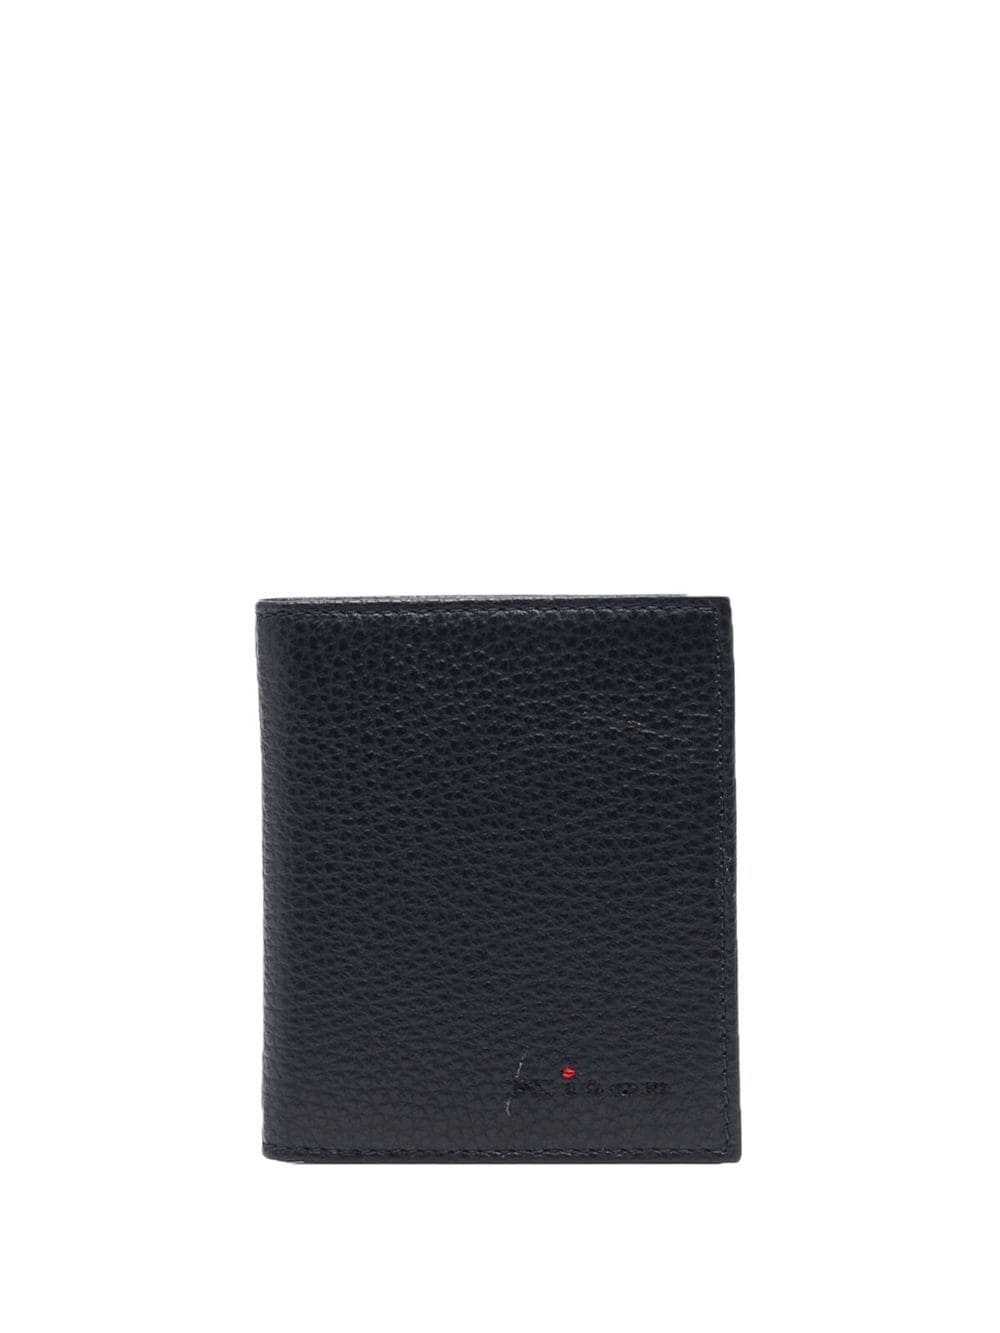 grained leather wallet